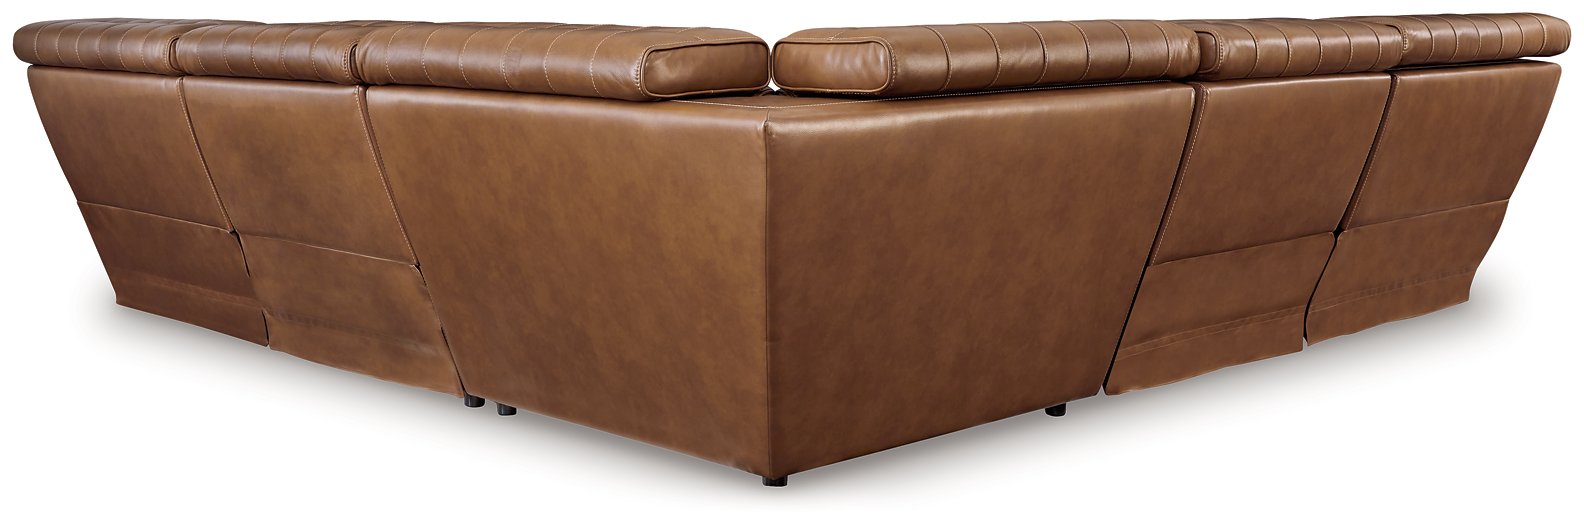 Temmpton Power Reclining Sectional - Evans Furniture (CO)